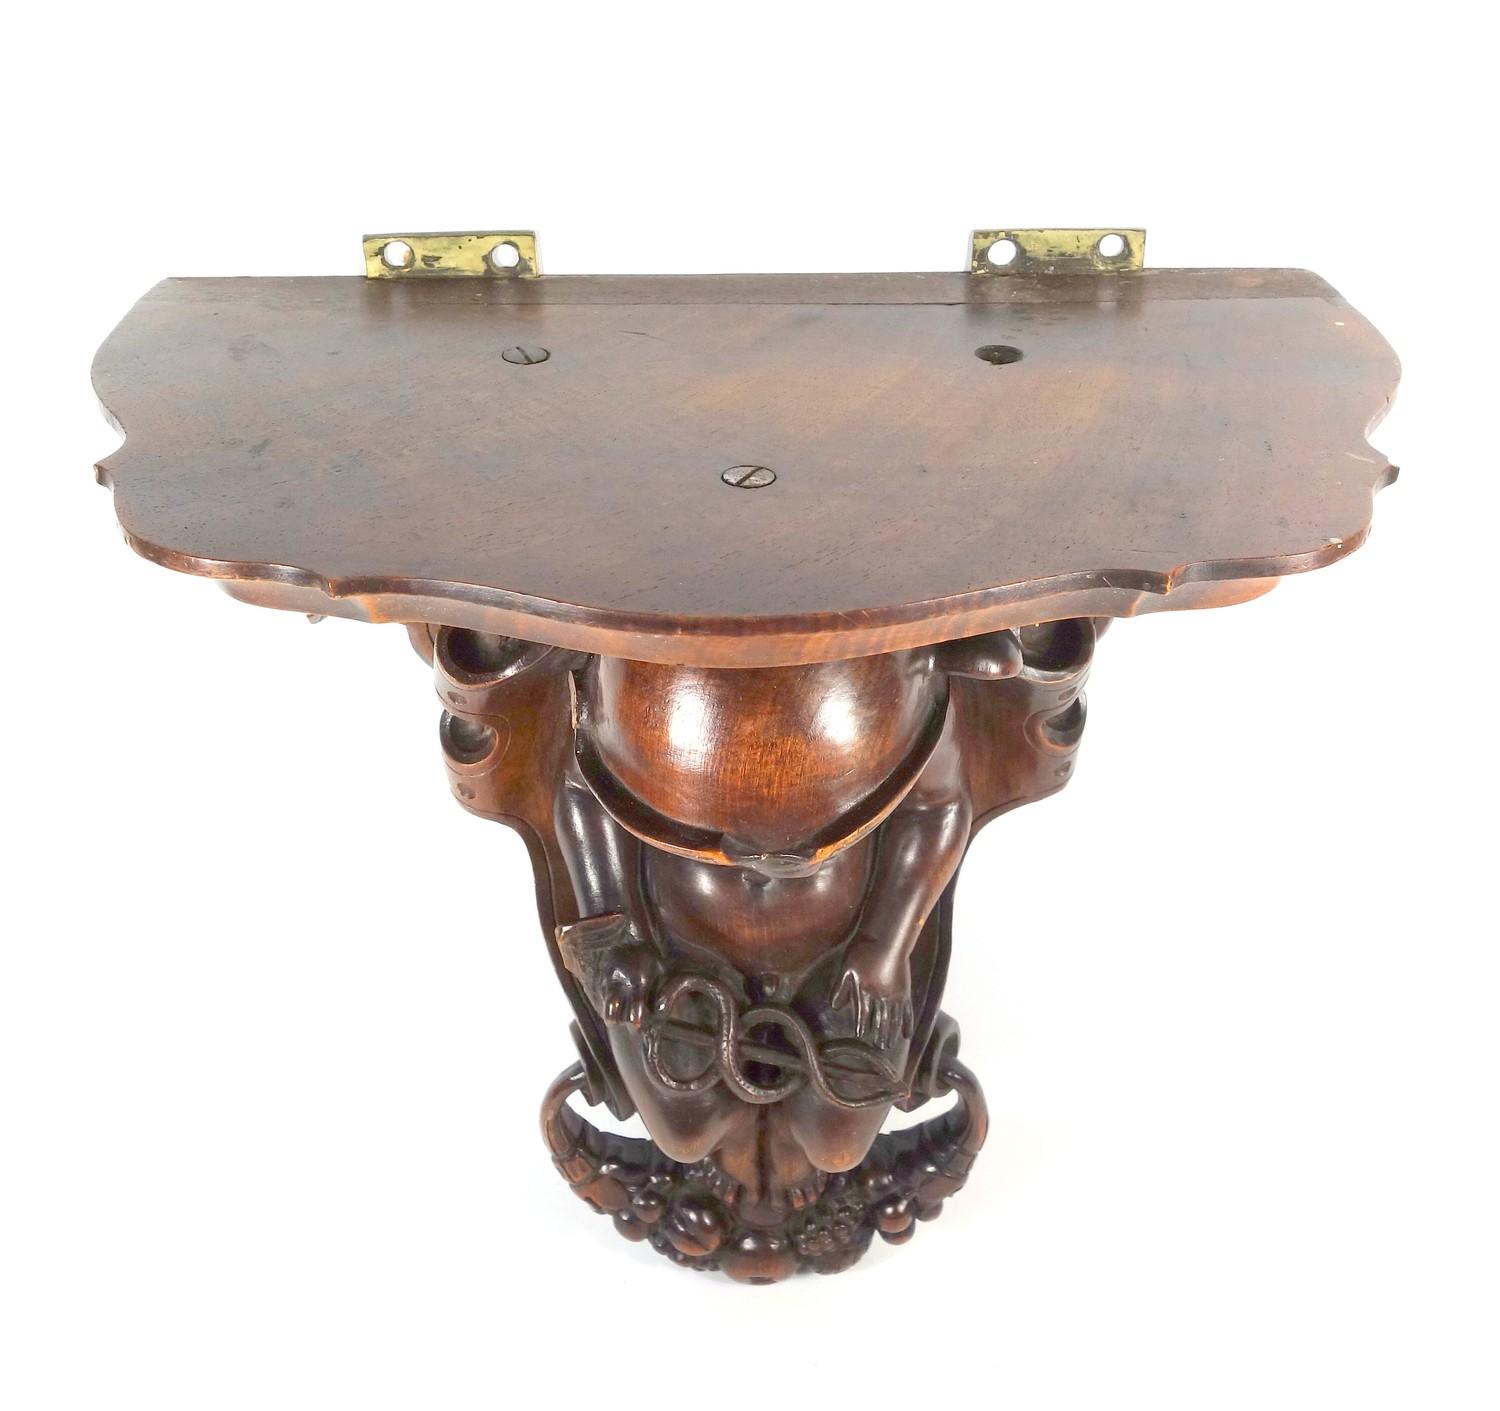 19TH CENTURY ITALIAN CARVED WALNUT WALL BRACKET WITH A FIGURE OF MERCURY SEATED AND HOLDING A - Image 3 of 9